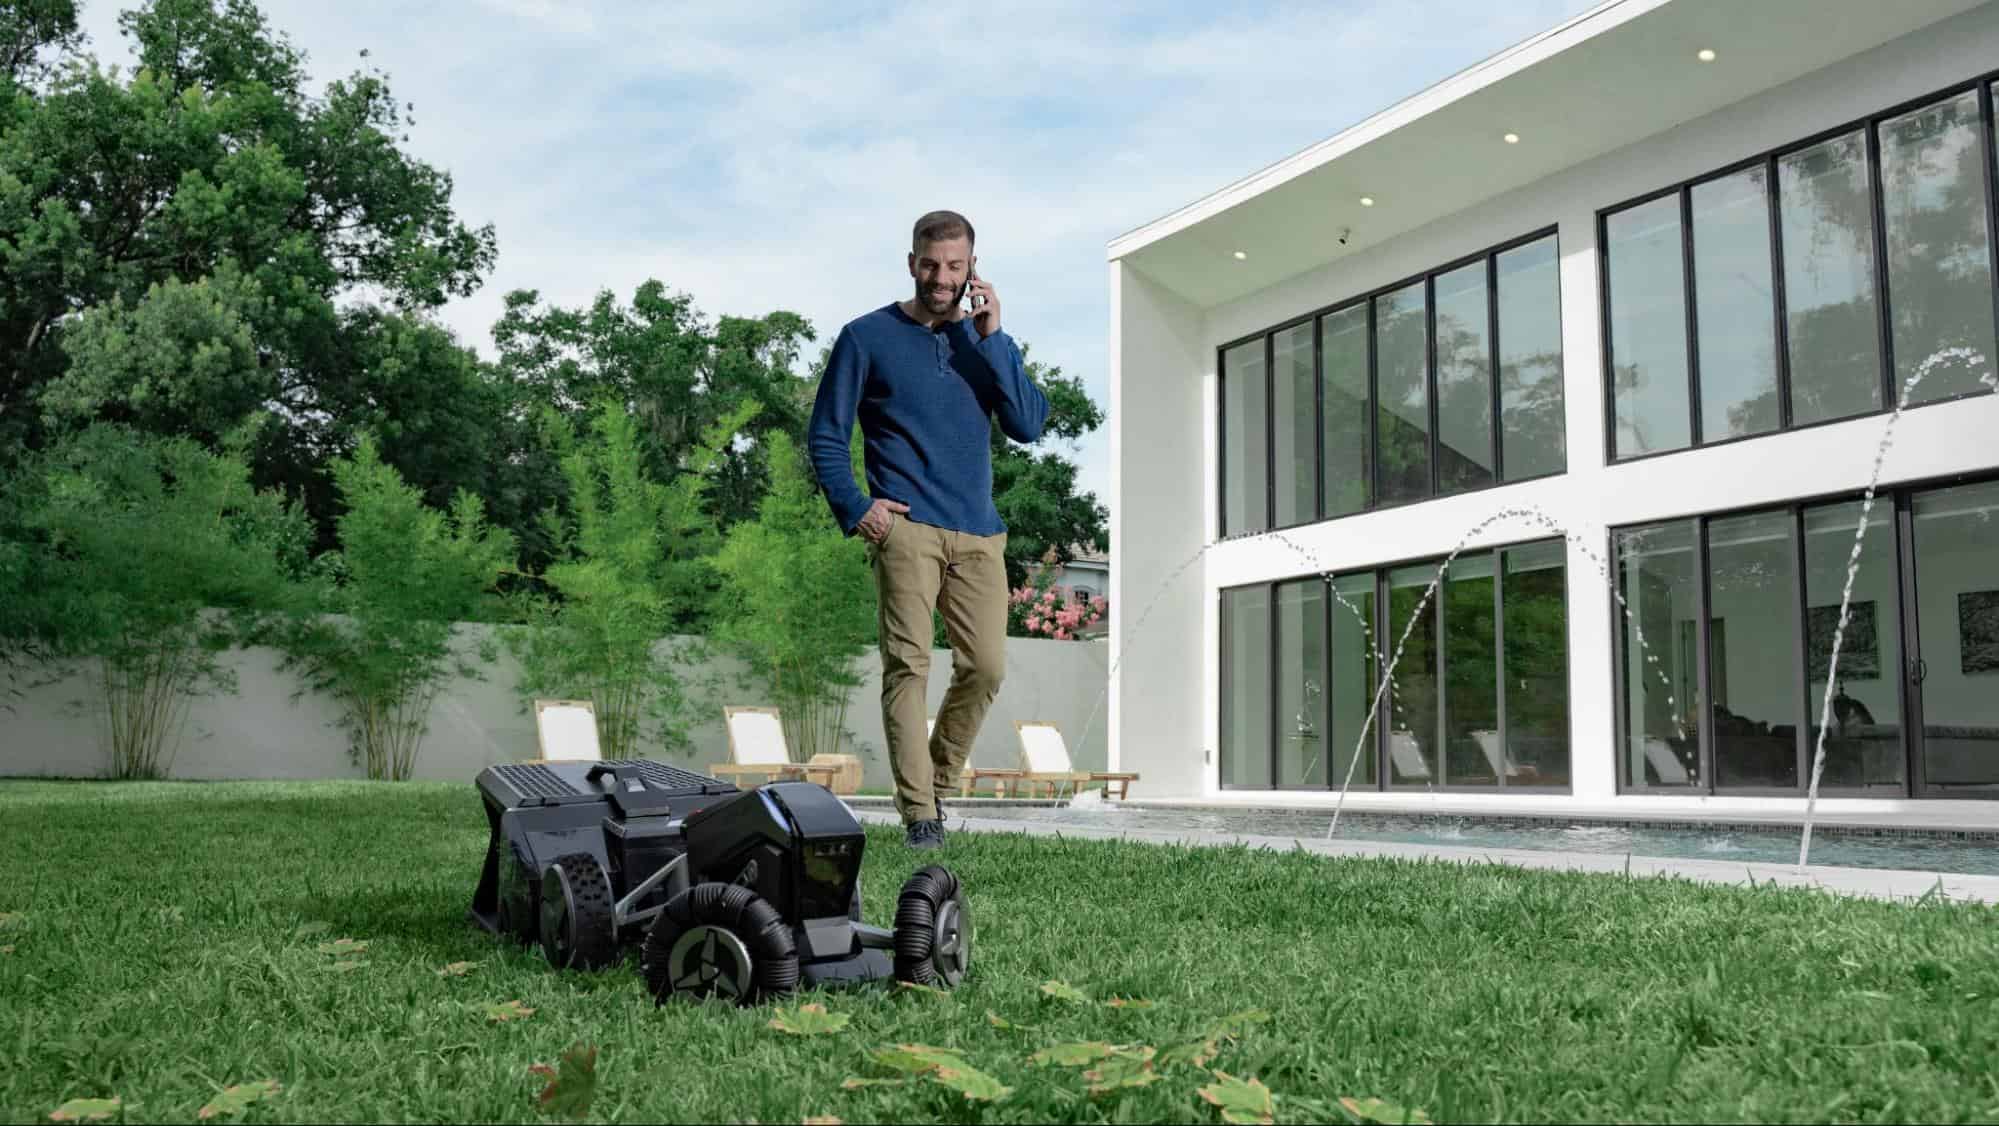 Do All Robot Lawn Mowers Need a Wire?